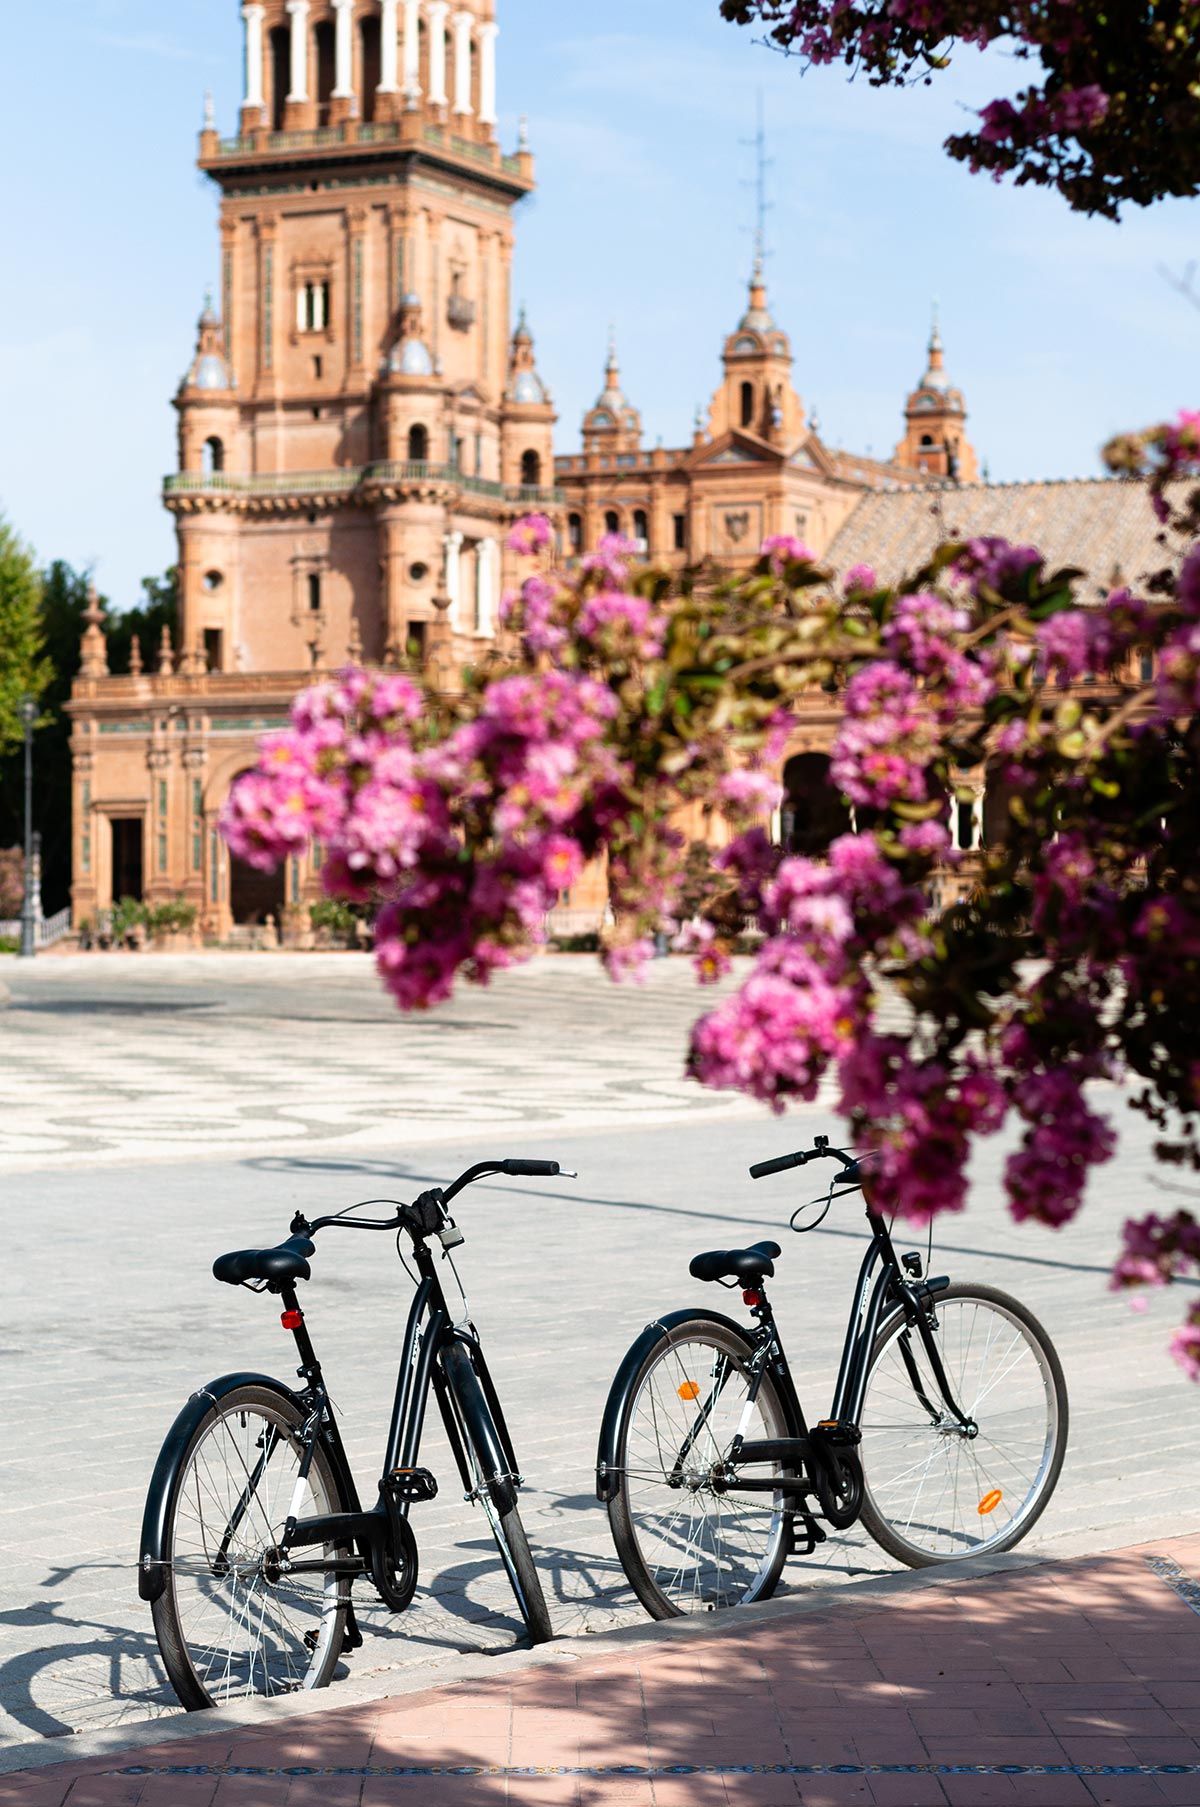 Seville is considered one of the best cities in the world for cyclists